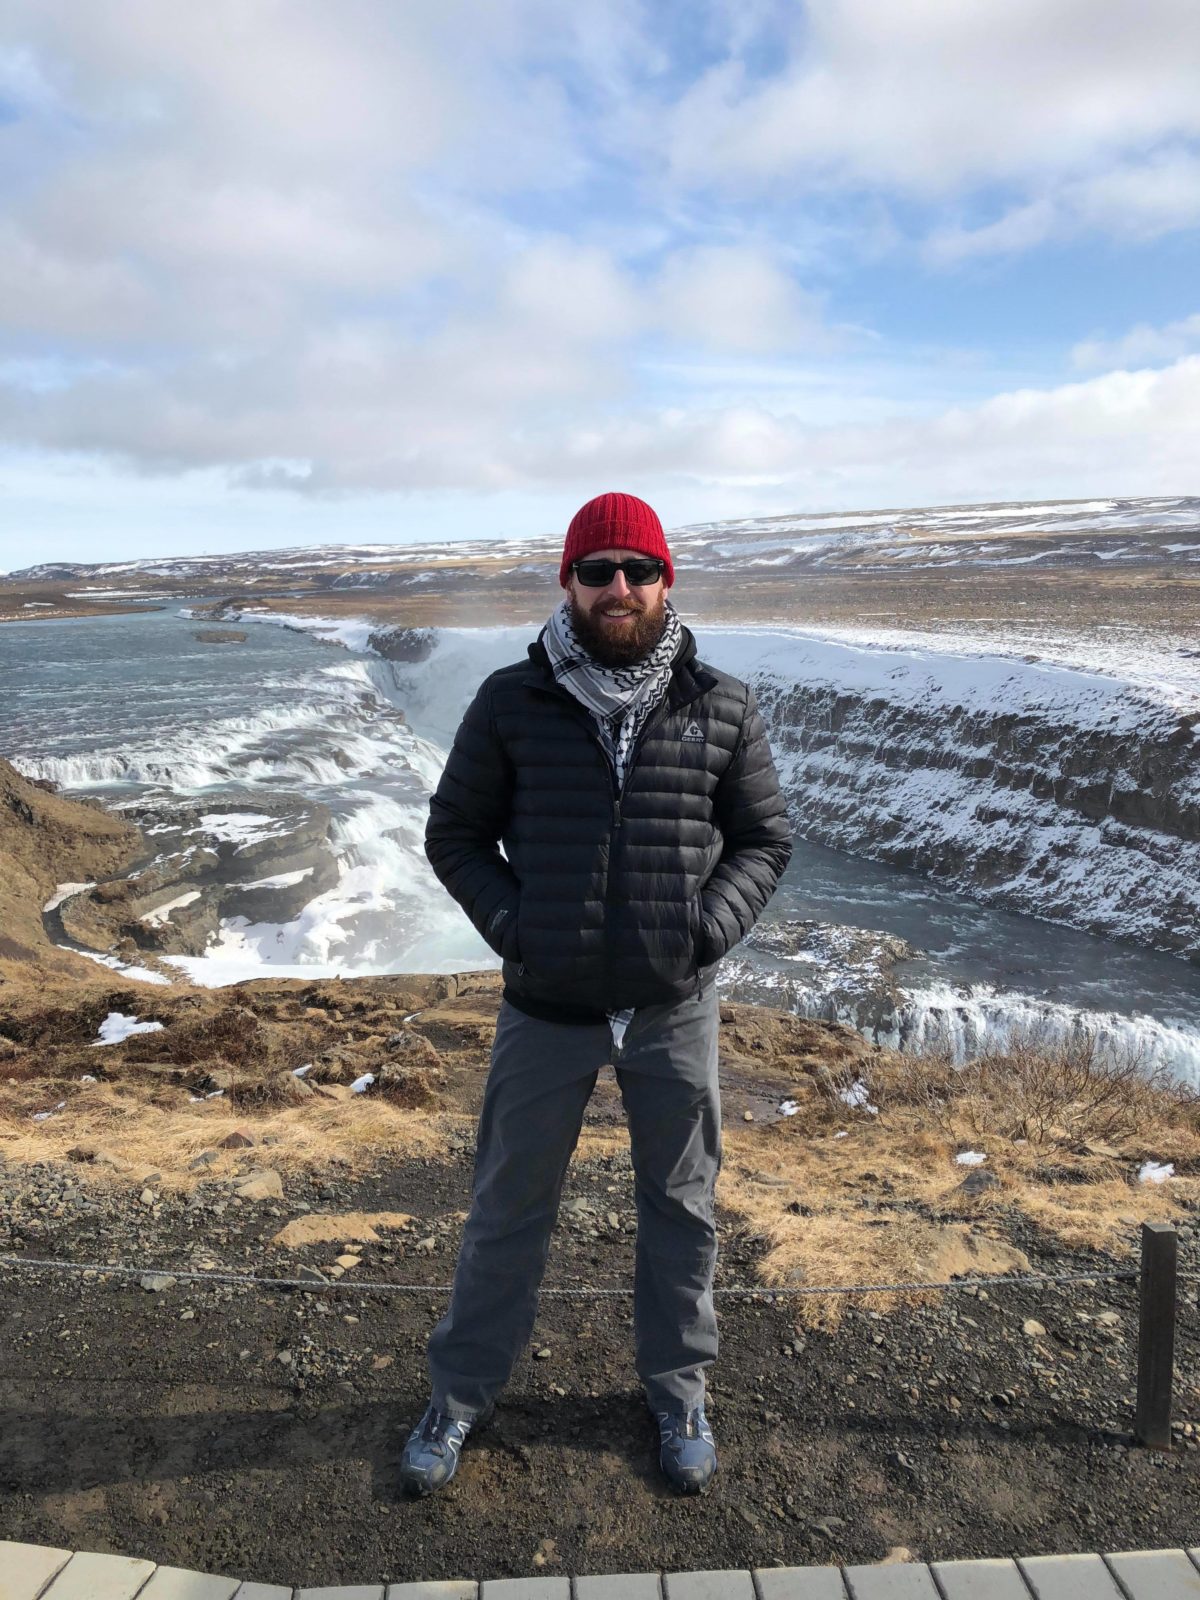 Red cap on iceland